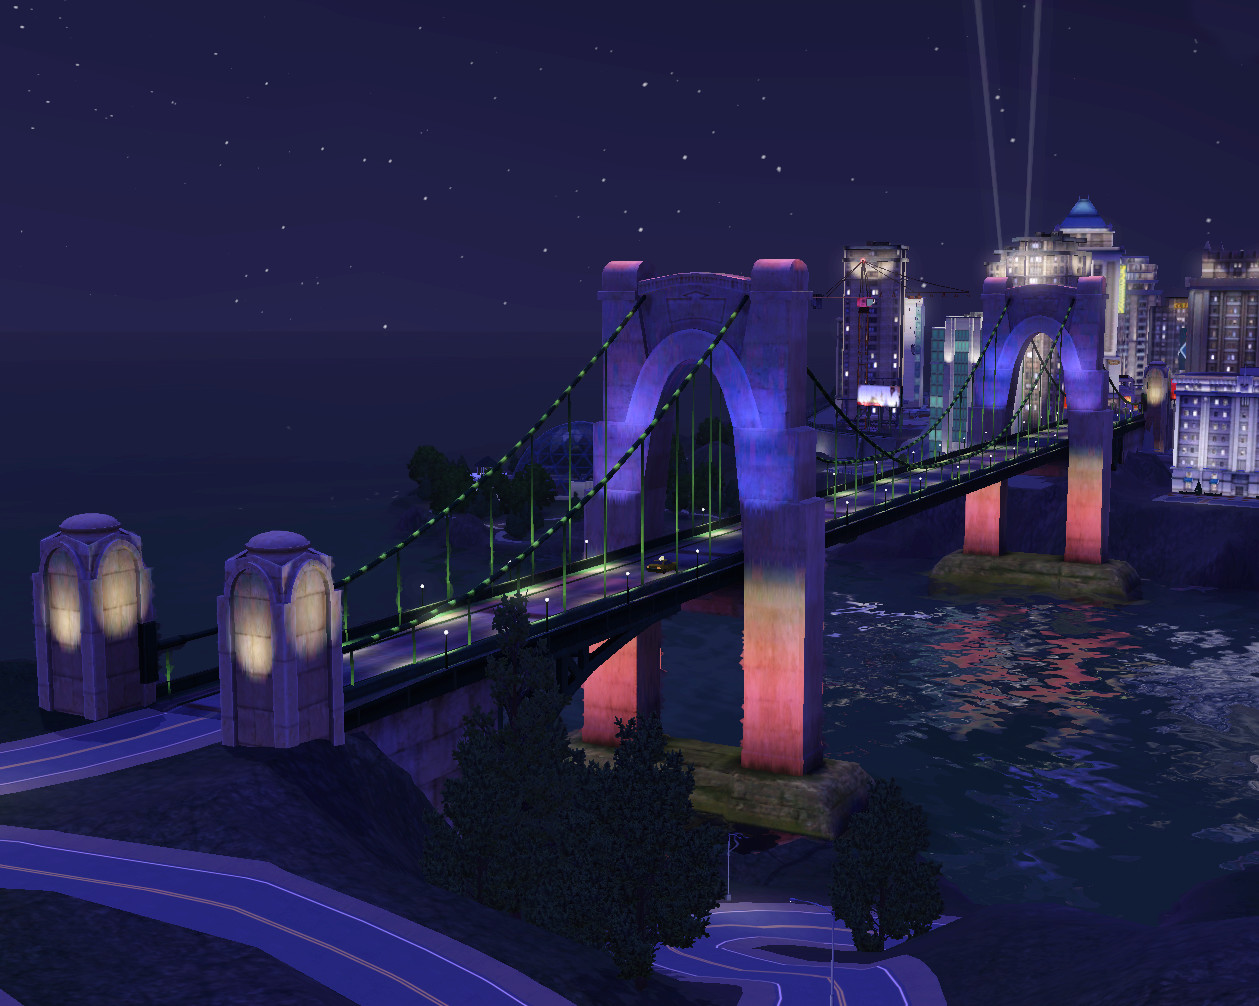 Building &amp; Props for The Sims.    Design, modeling, texturing and lighting. 
On the above image bridge only.